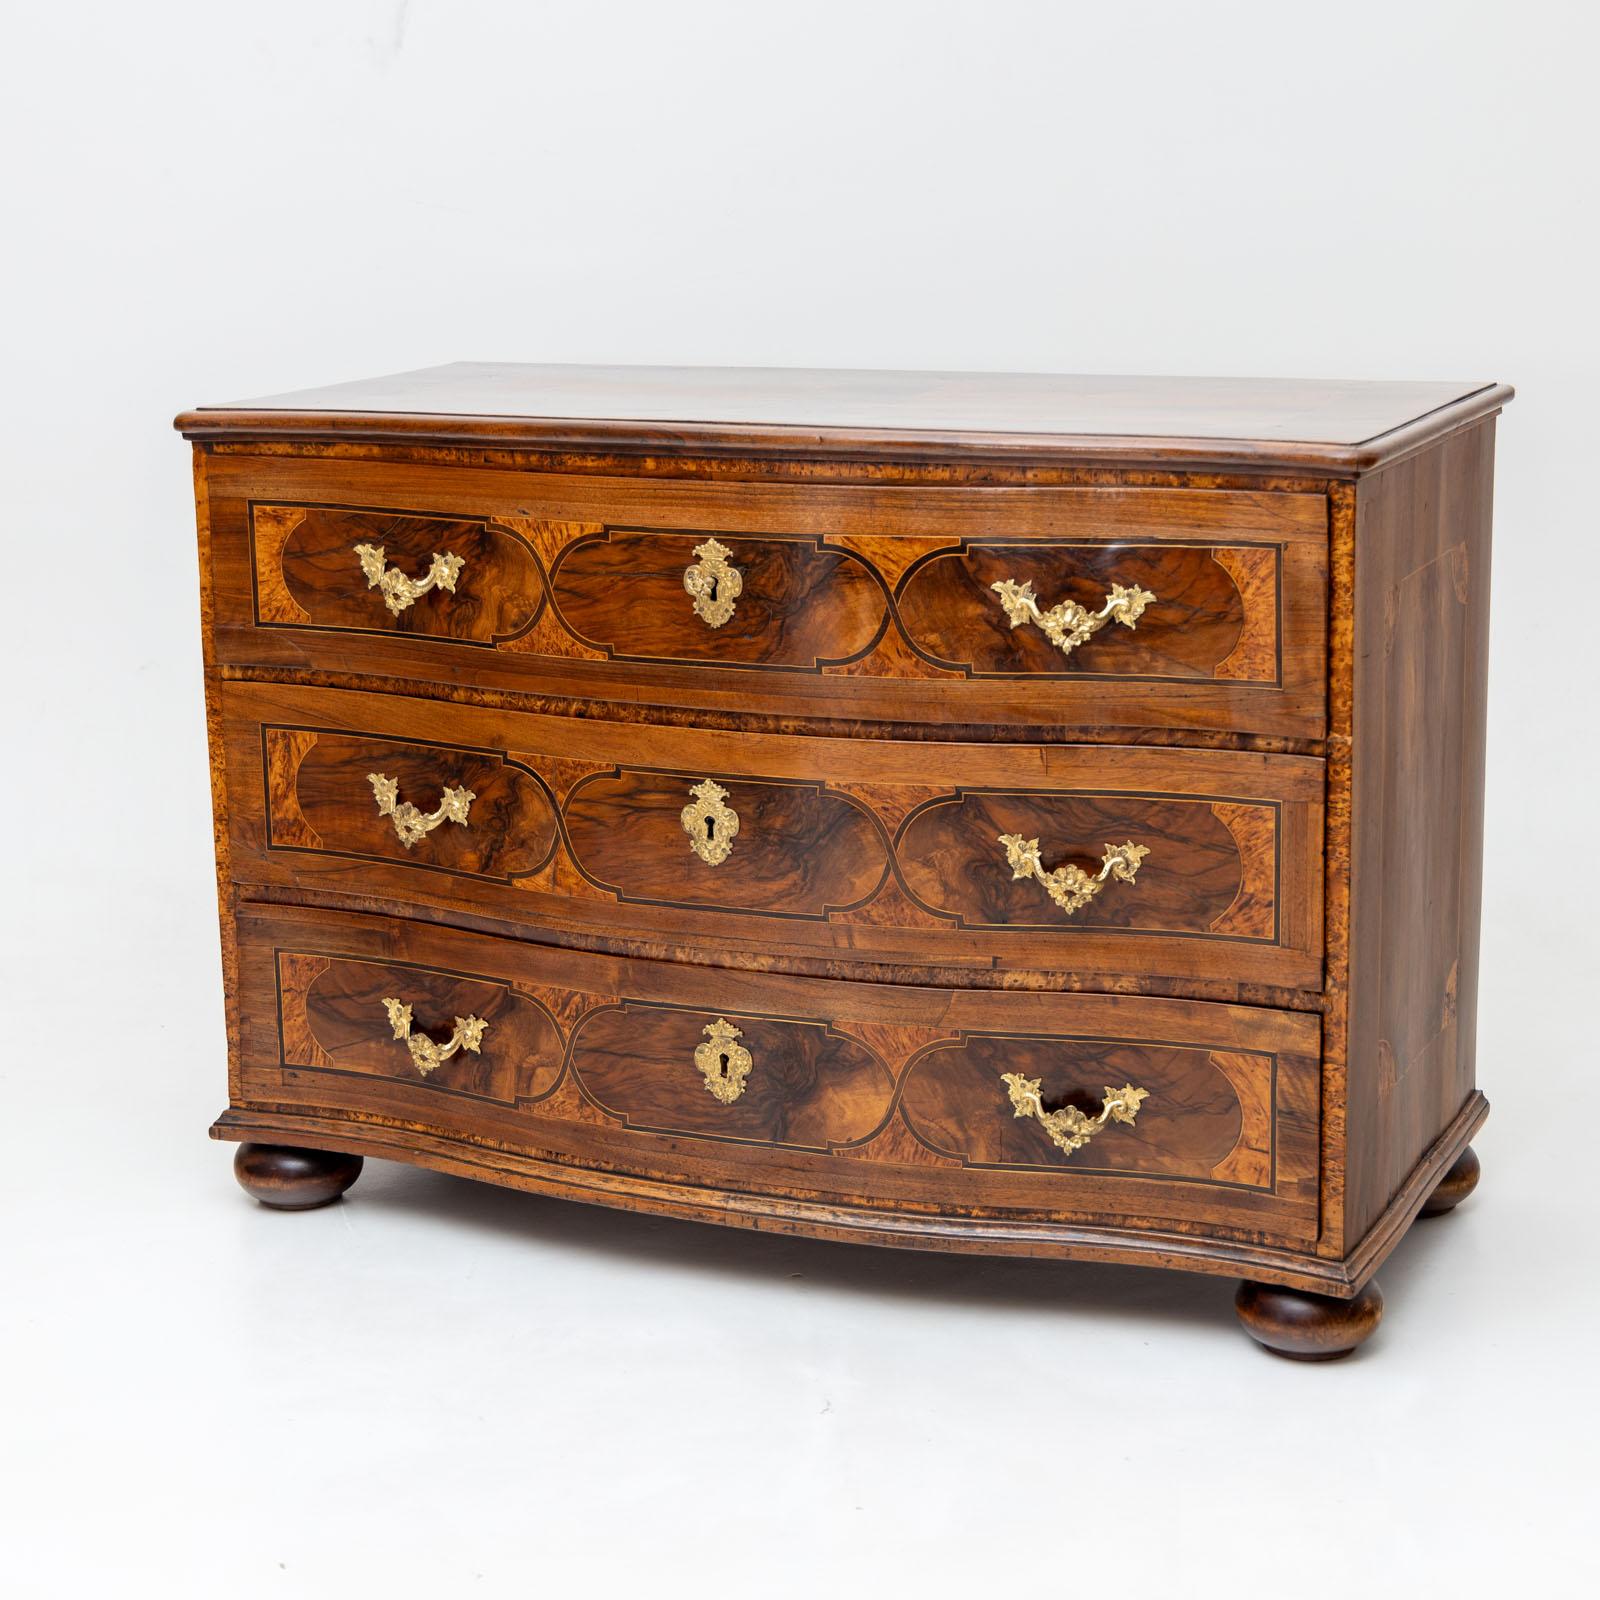 Large baroque chest of drawers with a curved front and three drawers. The chest of drawers rests on pressed ball feet and is profiled at the edges. The fronts of the drawers feature inlaid panels with framing marquetry in walnut. The sides and top